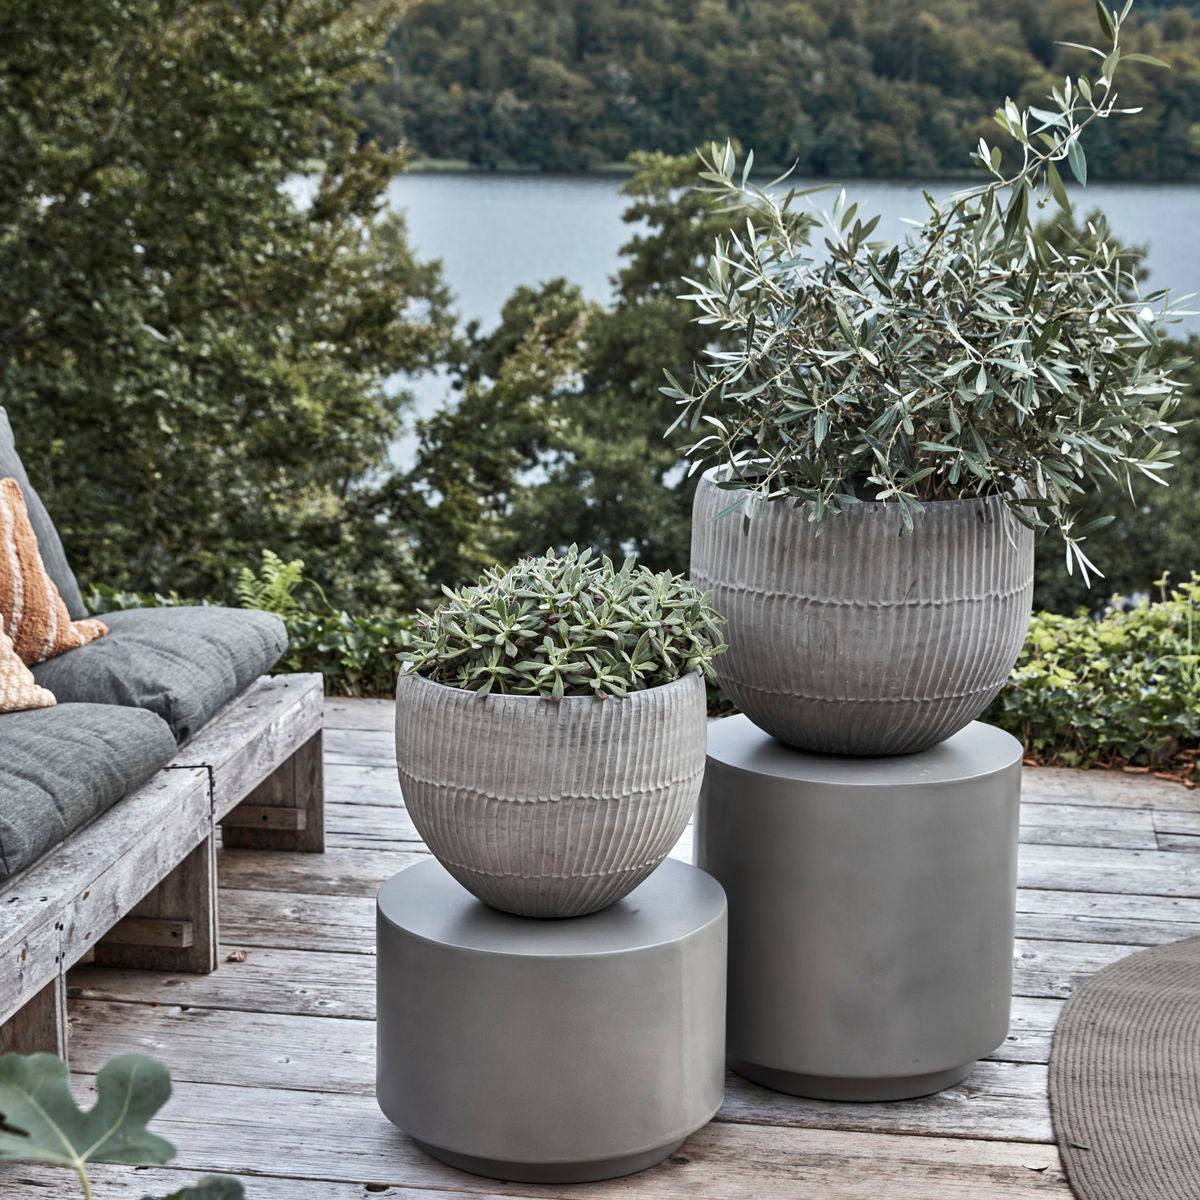 House Doctor Planter, HDBrave, Grey